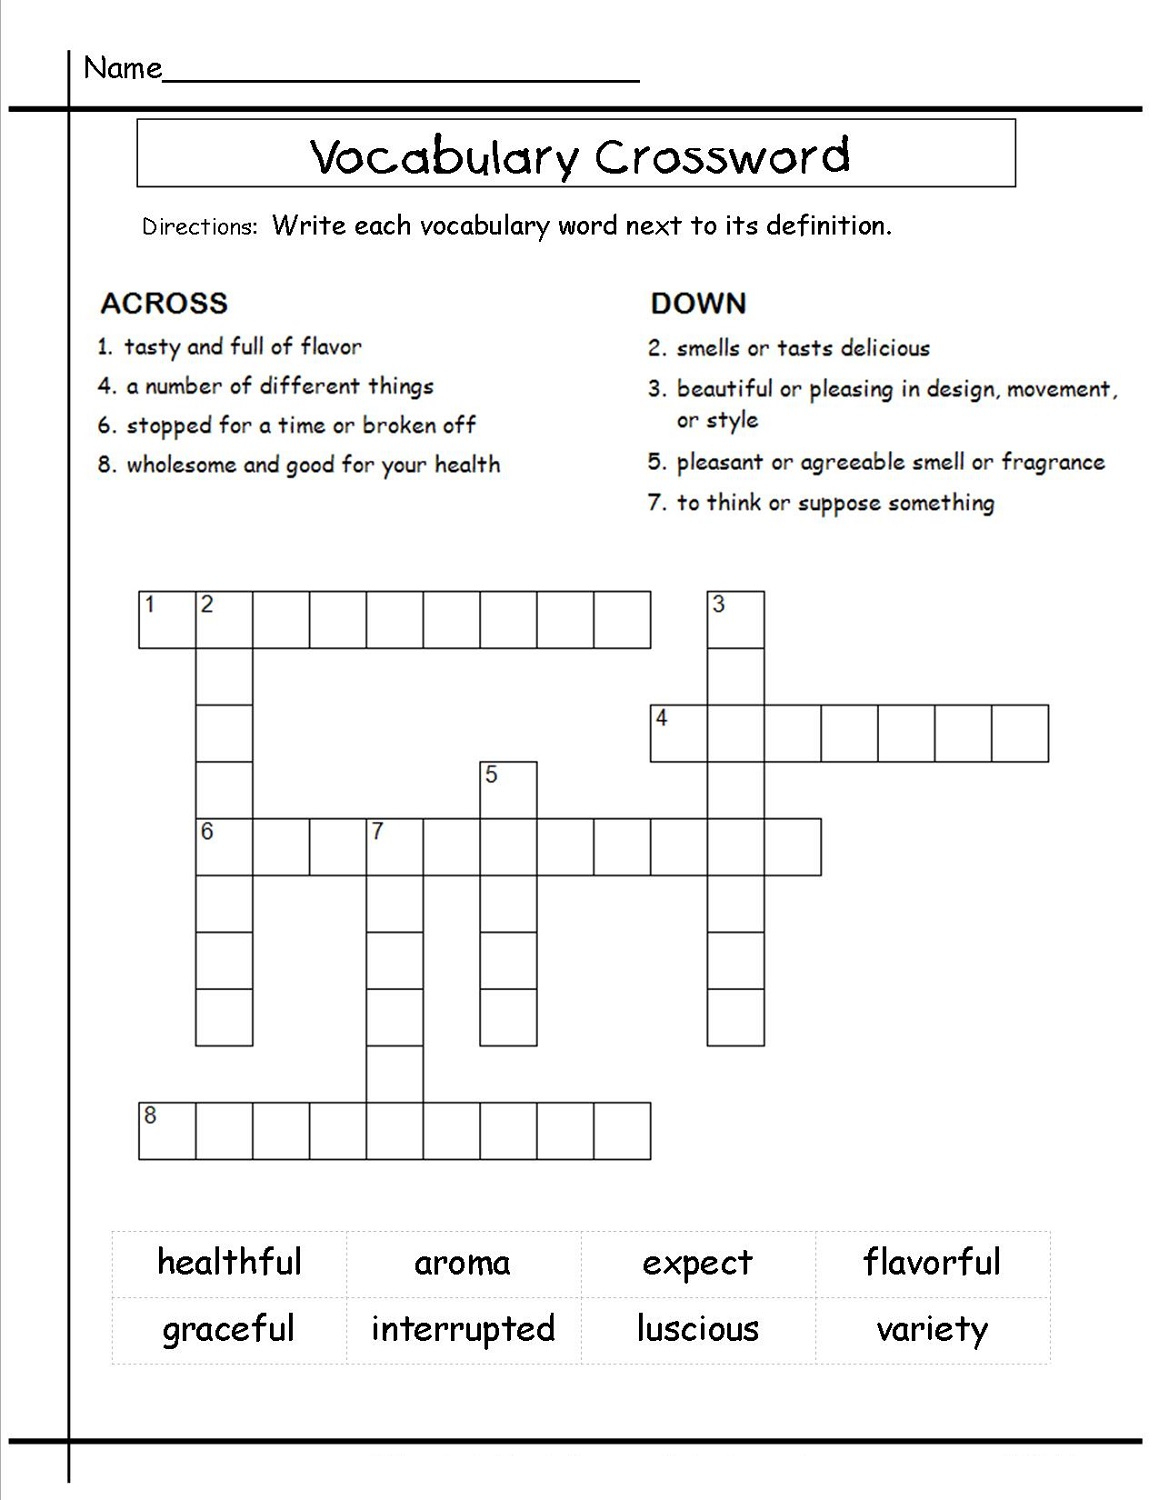 Crossword Puzzles For 5Th Graders | Activity Shelter - Free Printable Crossword Puzzles For 5Th Graders